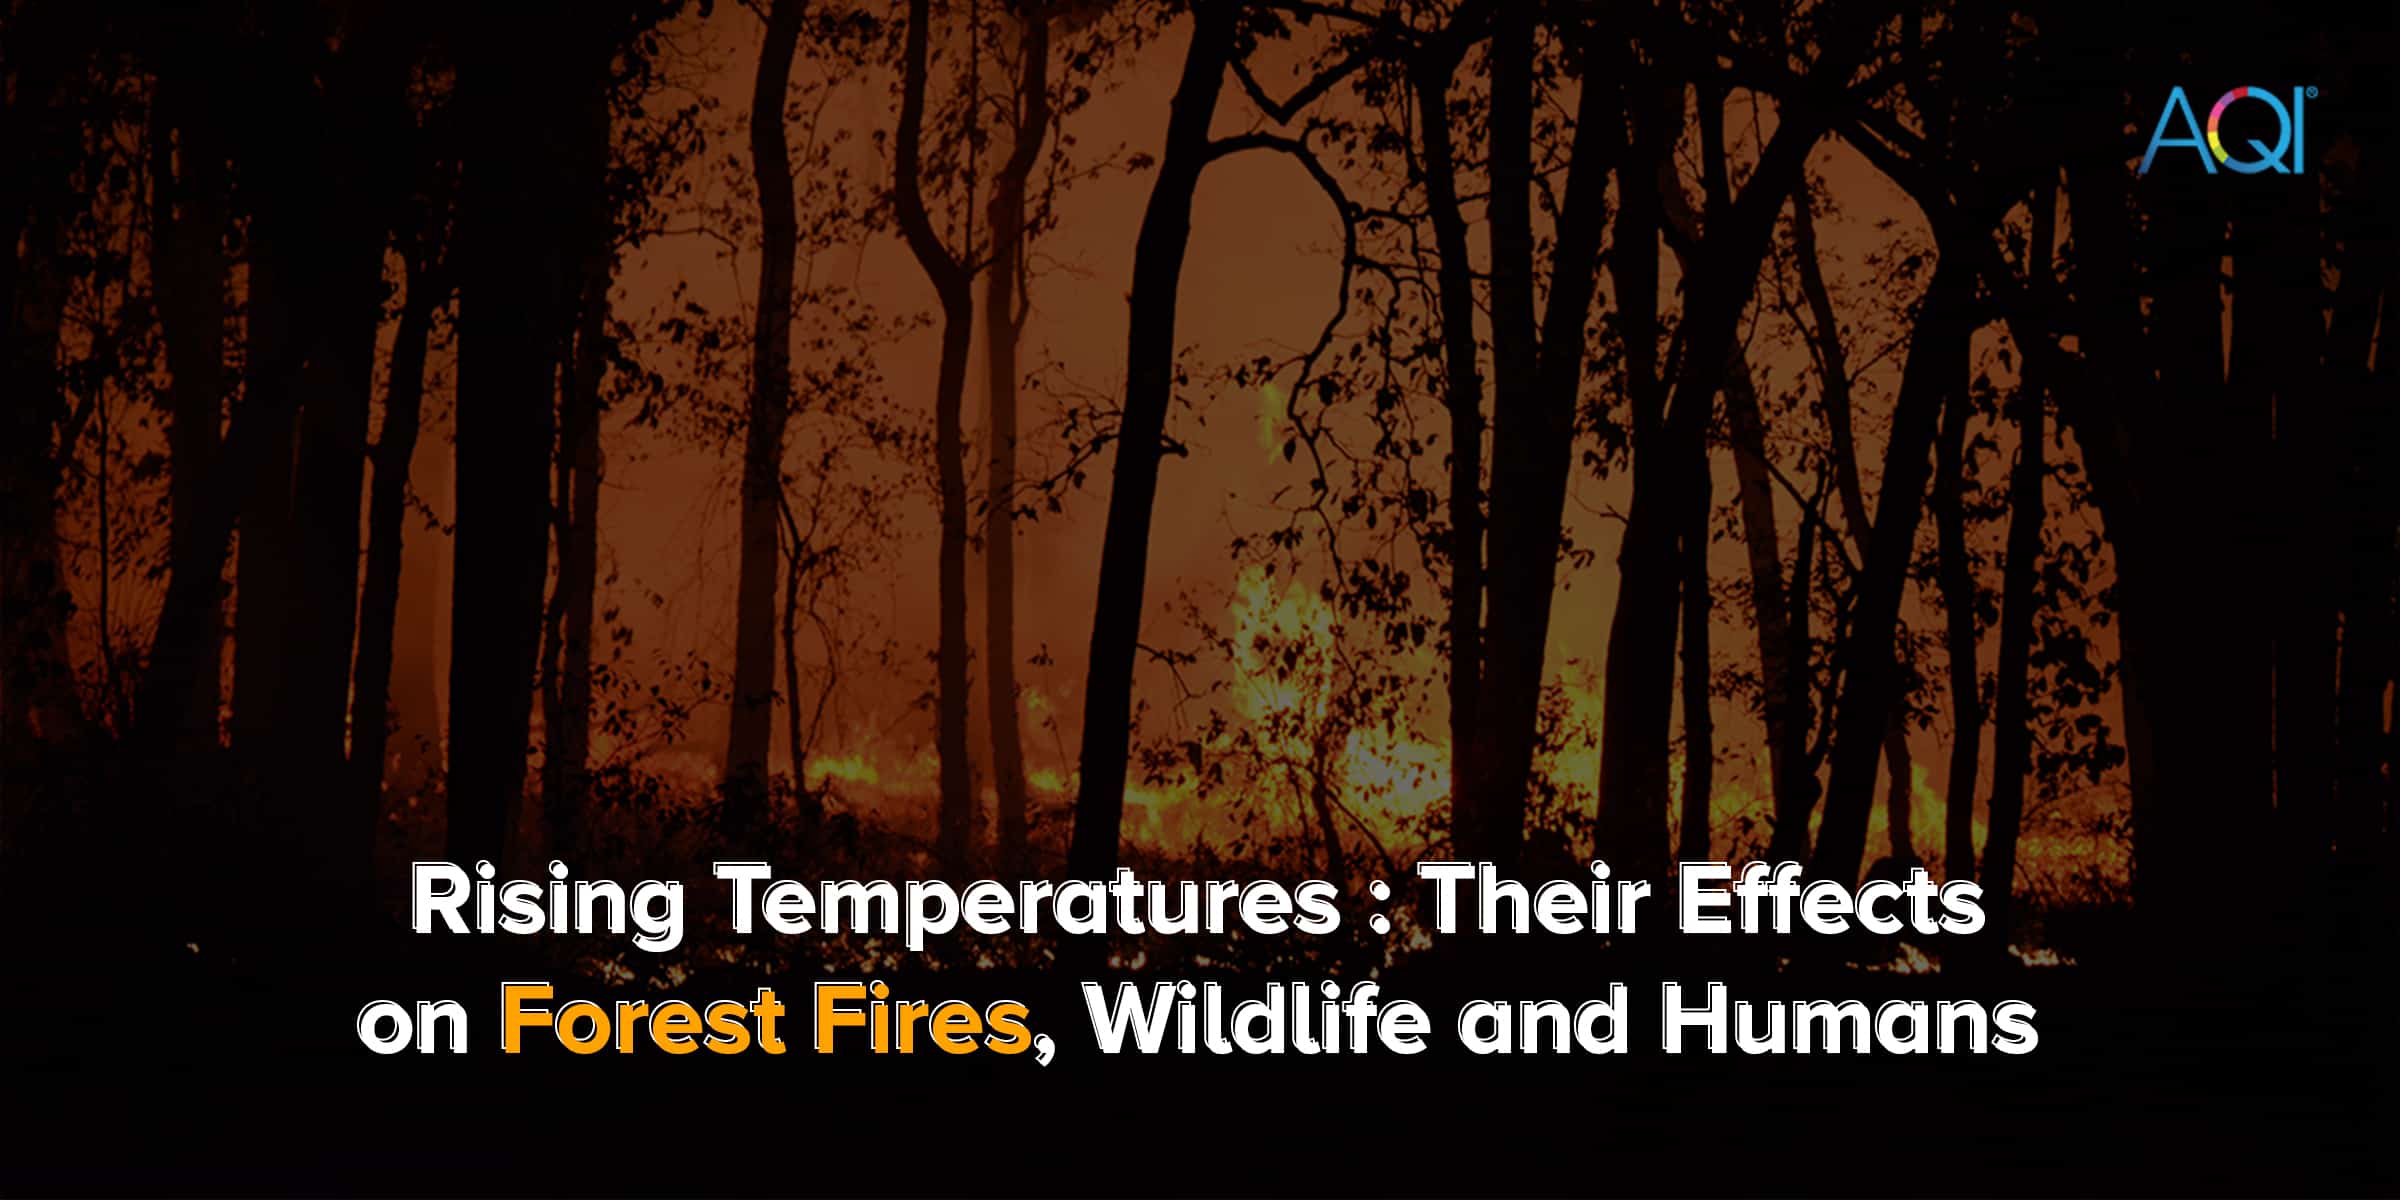 Forest fires and impact on wildlife and humans